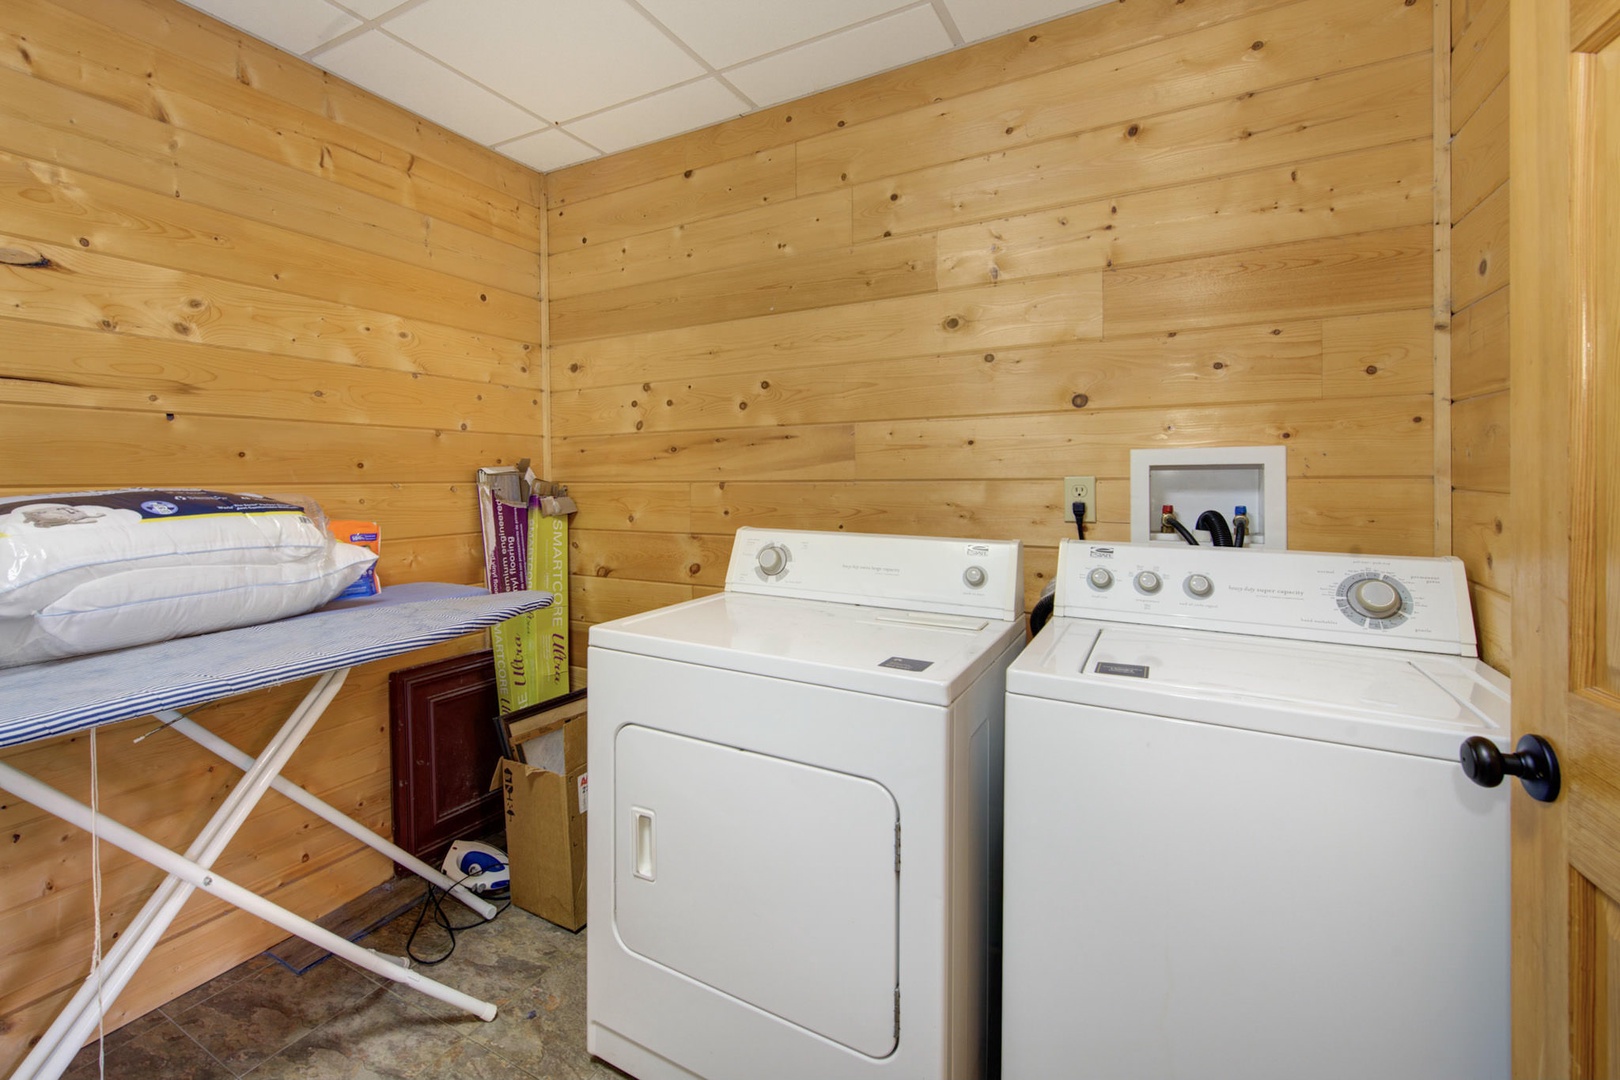 Washer & dryer for guest use